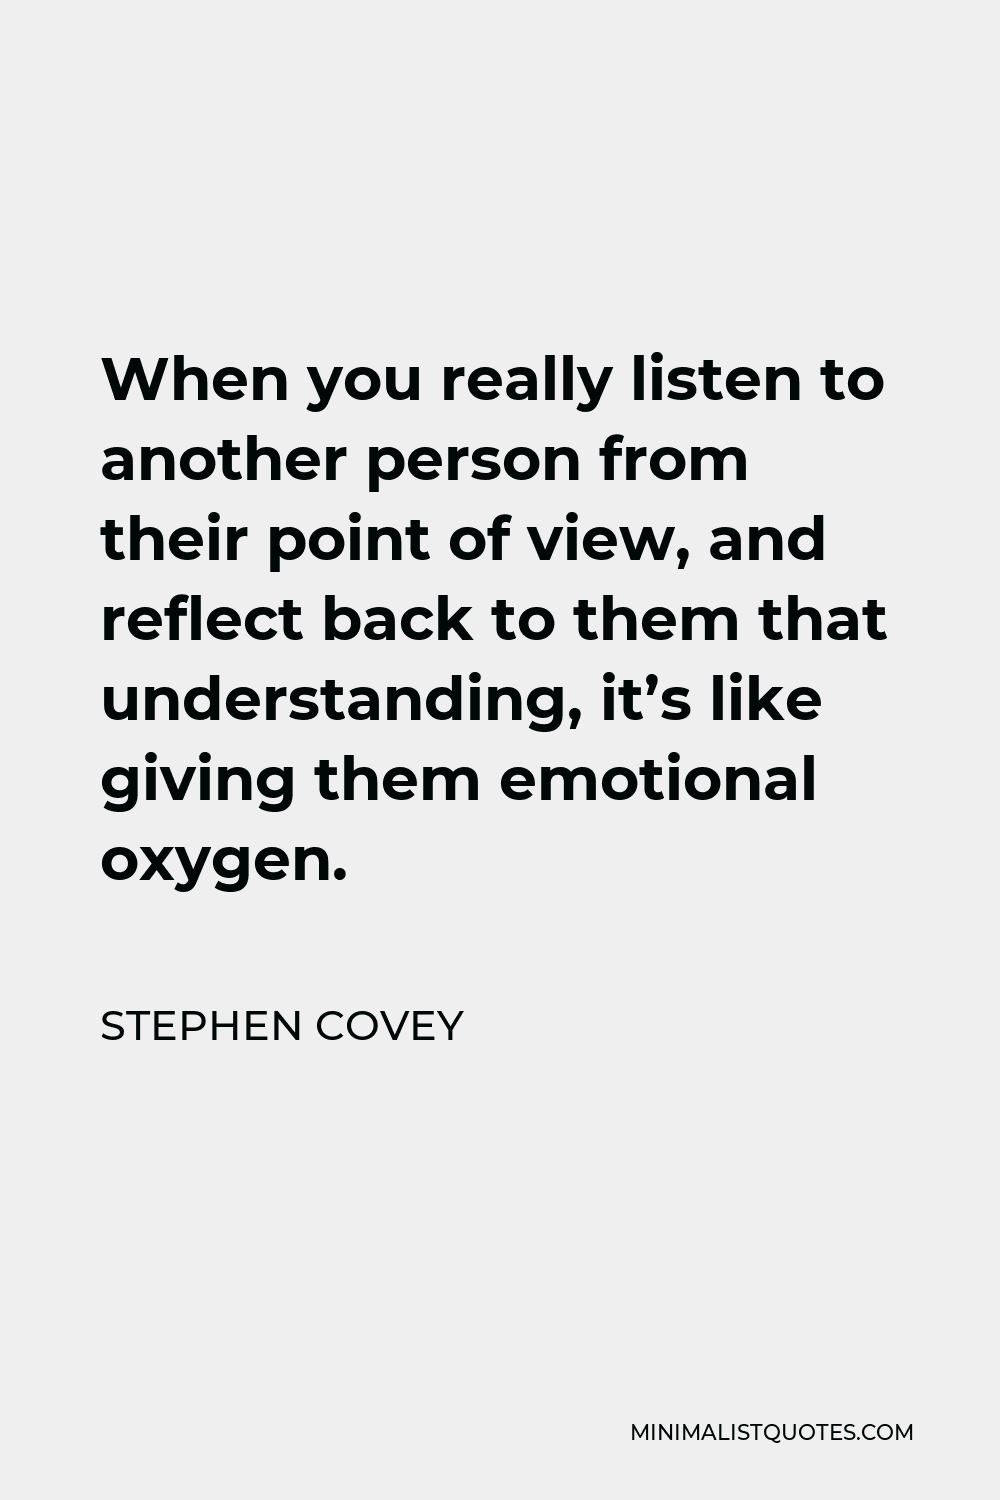 Stephen Covey Quote - When you really listen to another person from their point of view, and reflect back to them that understanding, it’s like giving them emotional oxygen.